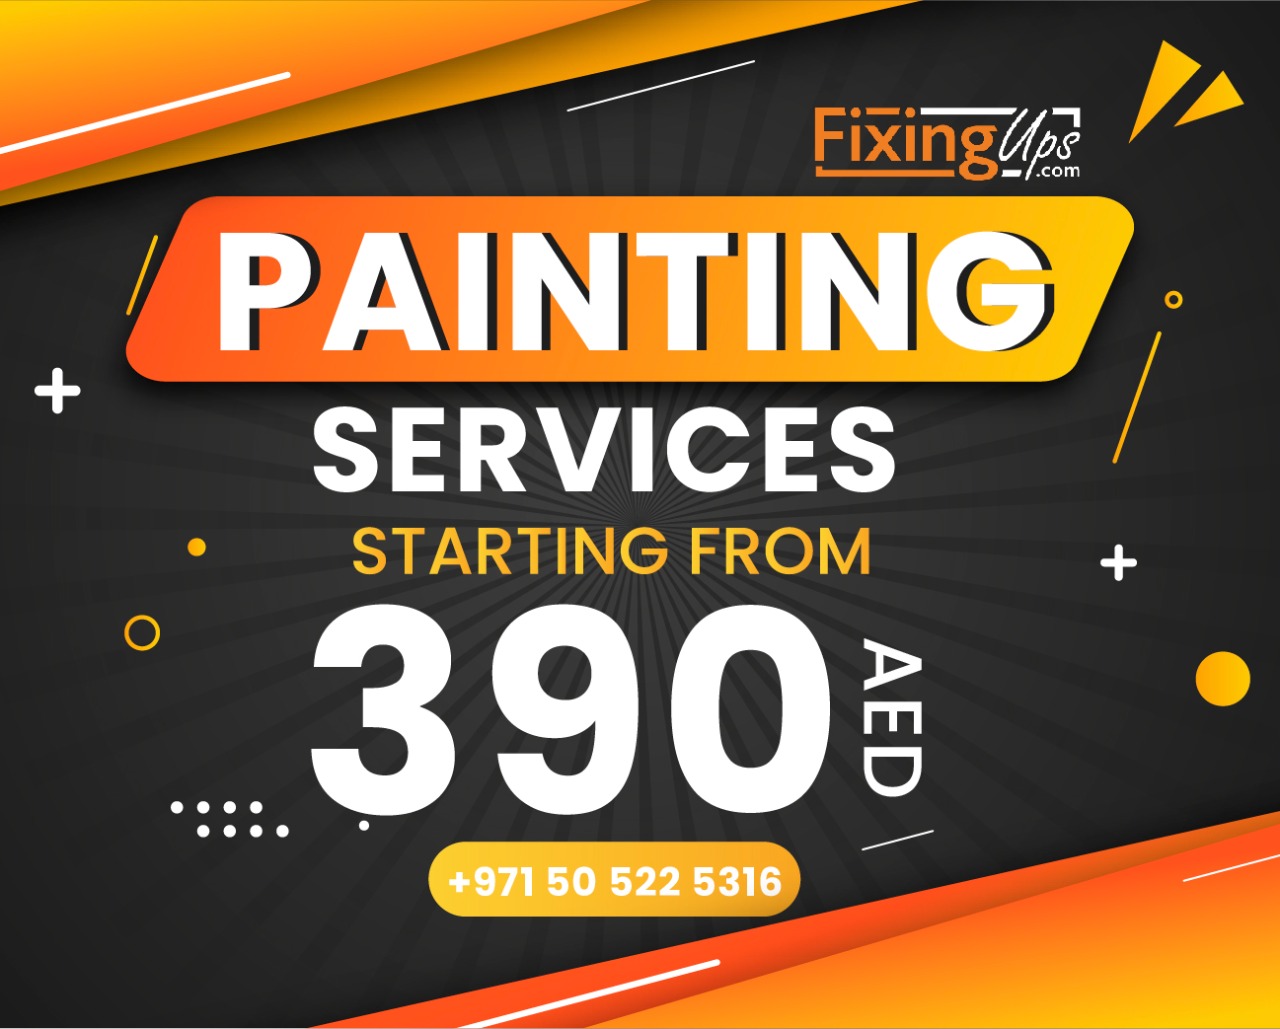 FixingUps Provides 35% OFF House Painting Deals*